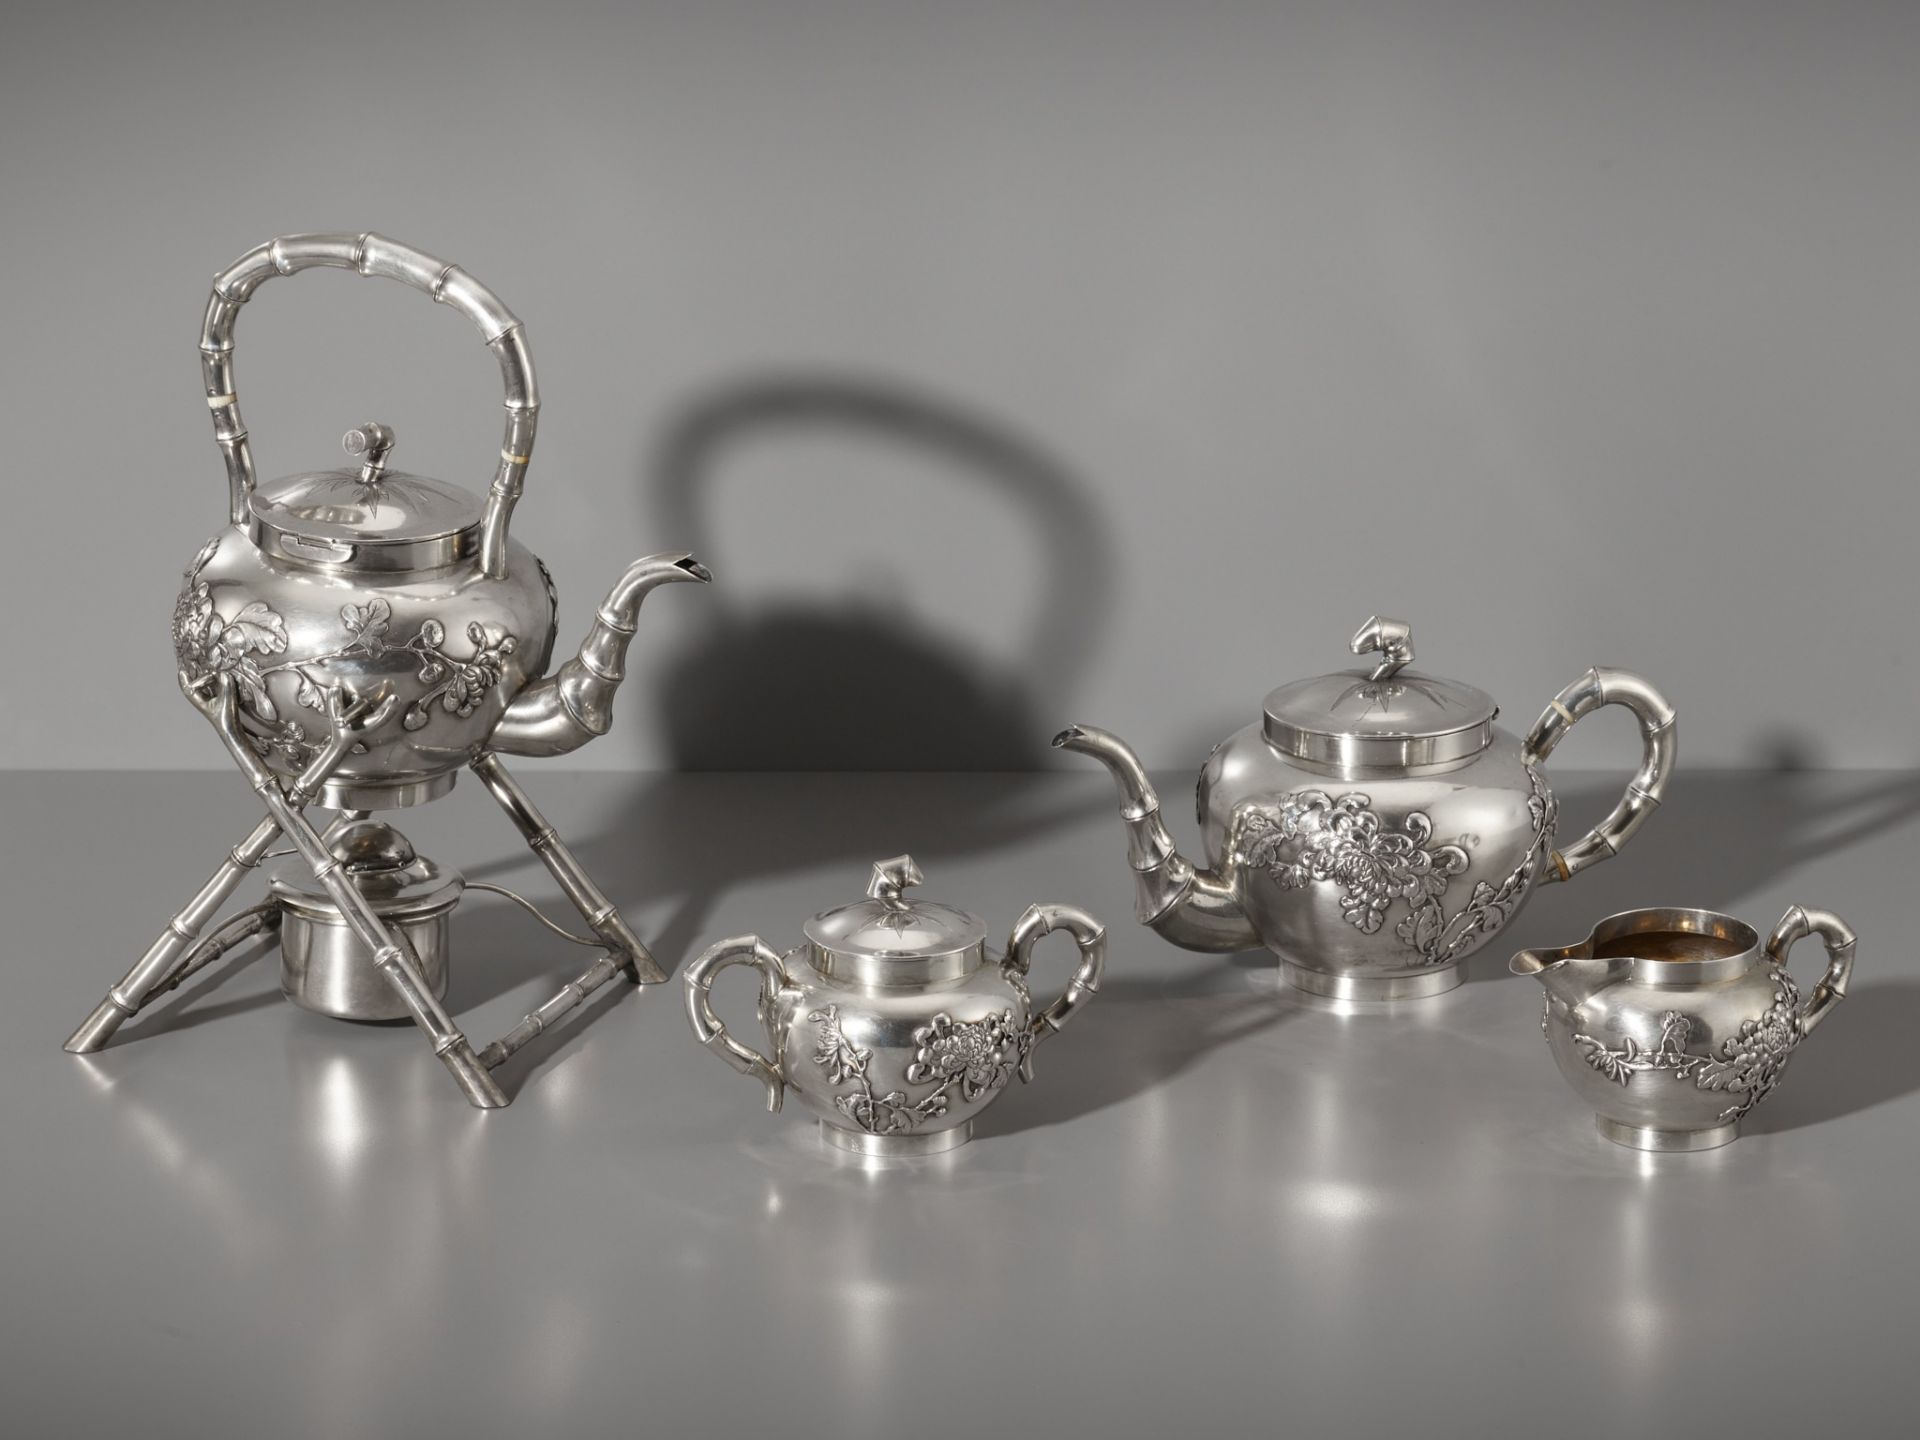 A SIX-PIECE ‘CHRYSANTHEMUM’ 900/1000 SILVER TEA & COFFEE SERVICE, OVER 2 KG TOTAL WEIGHT, LATE QING